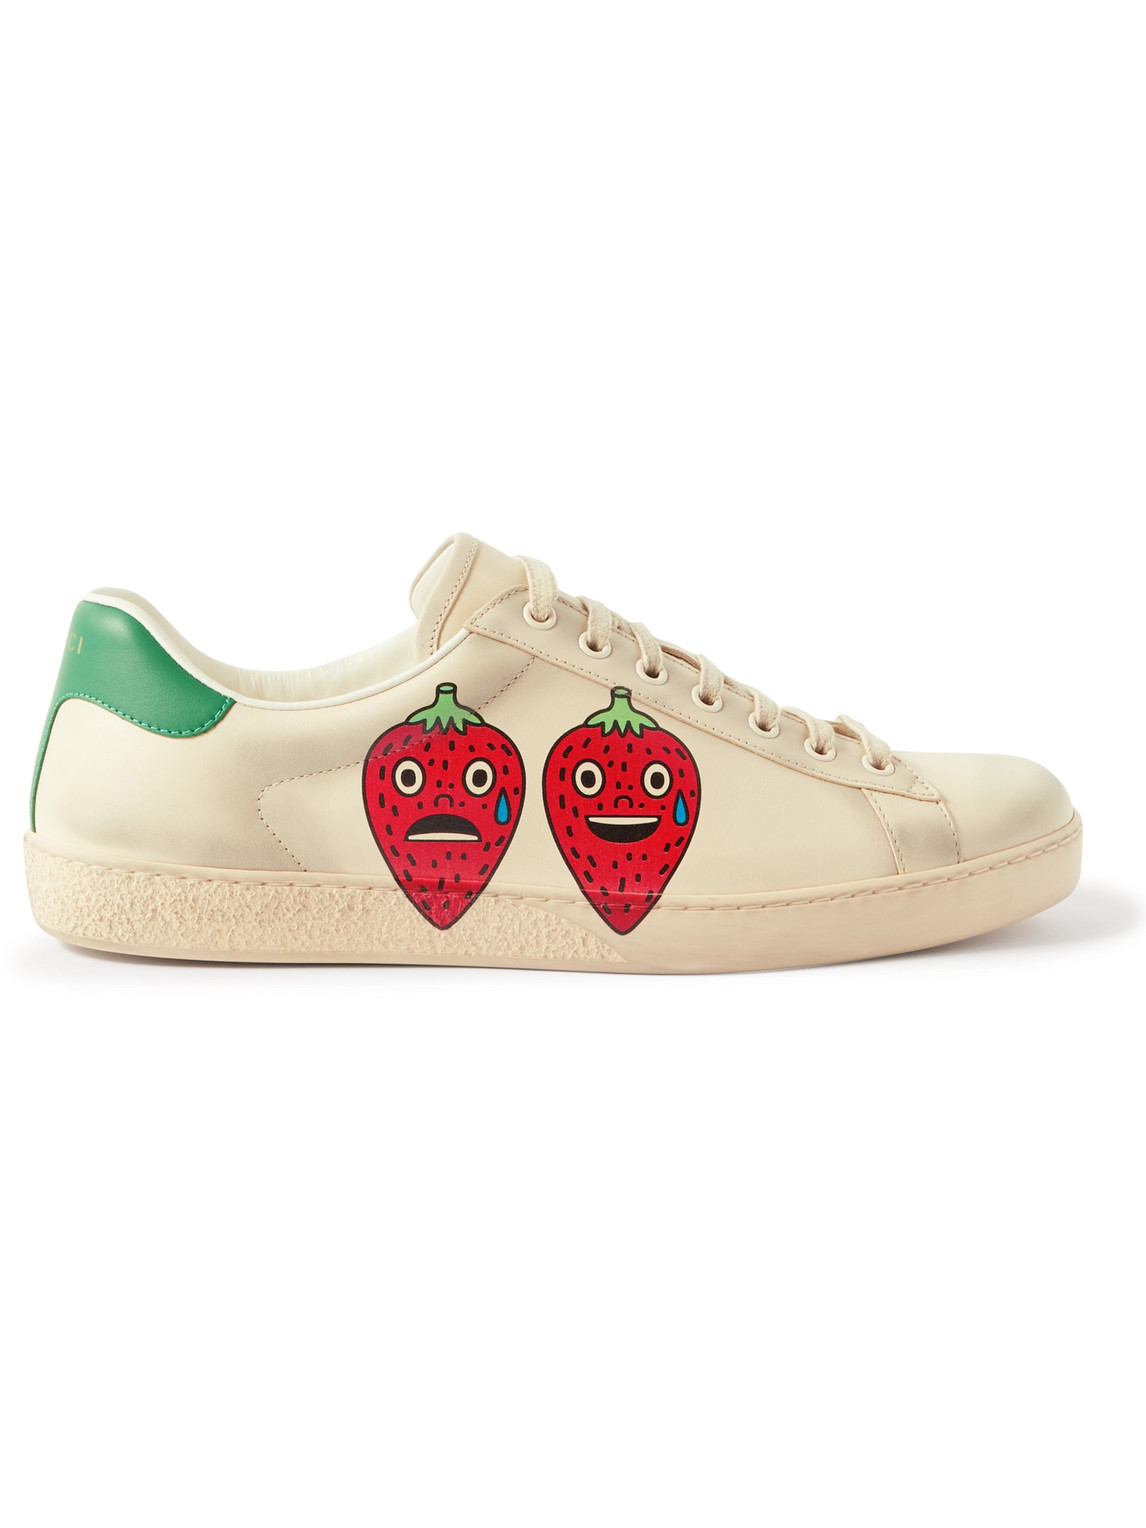 GUCCI NEW ACE PRINTED LEATHER SNEAKERS